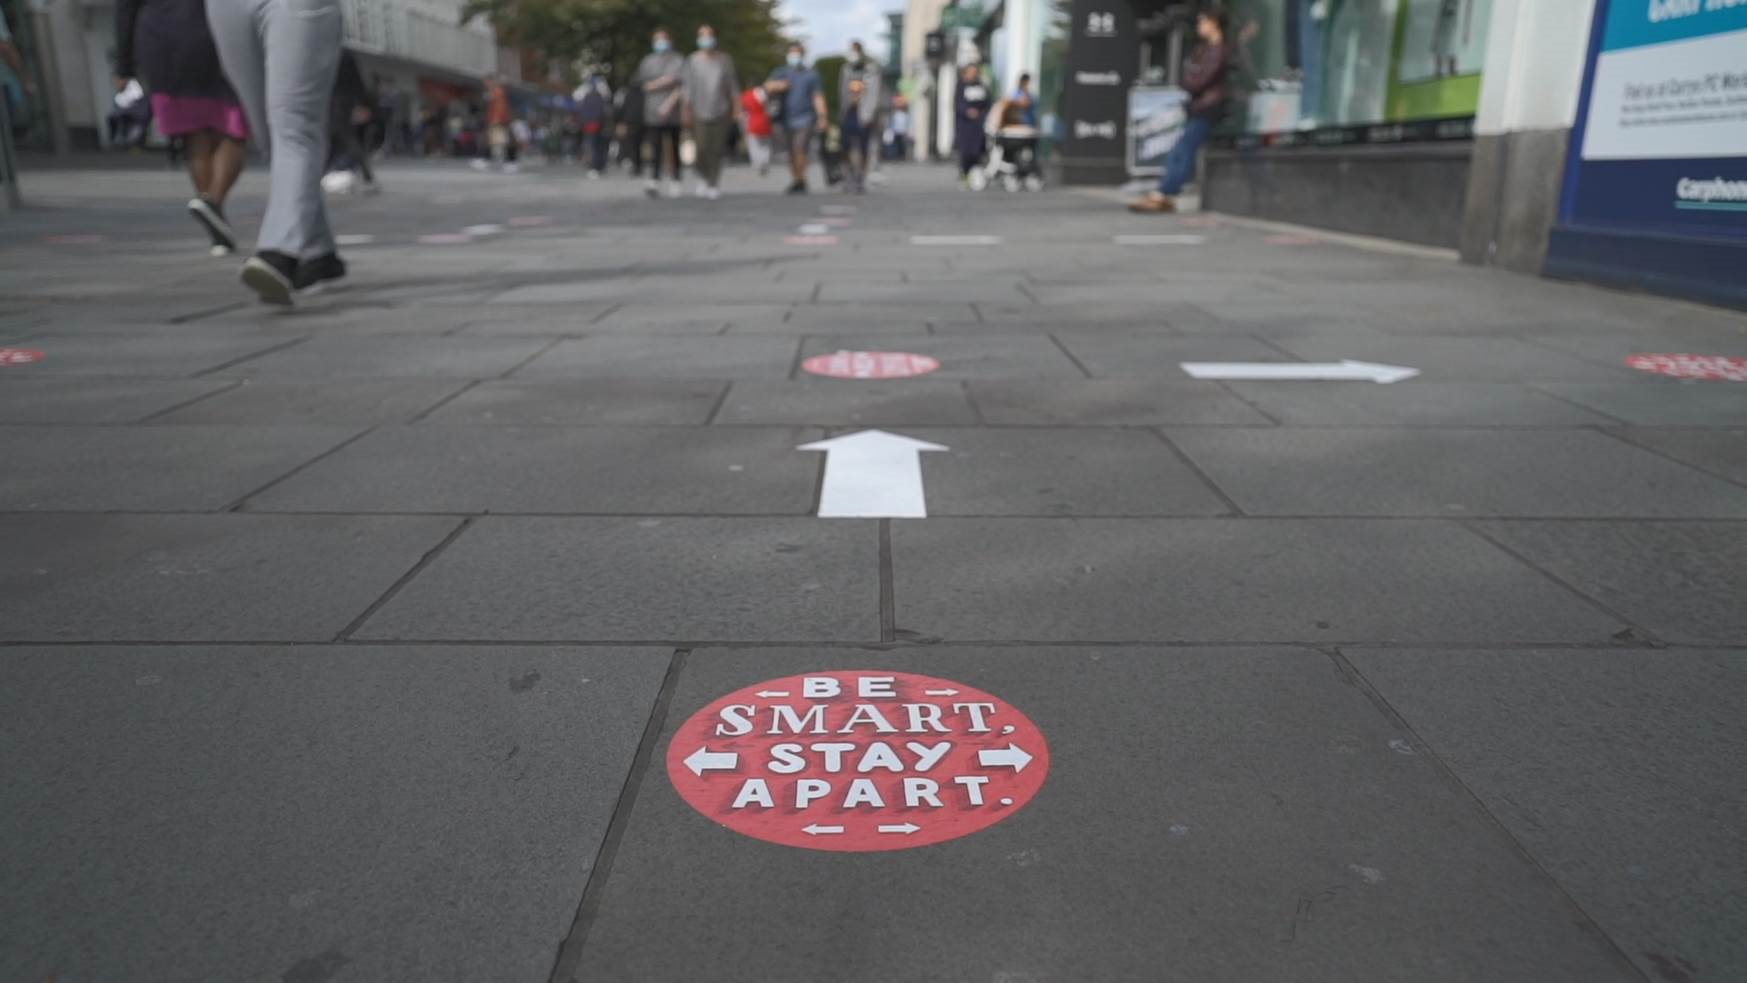 Sticker on the ground at Above Bar Street saying 'Be smart, stay apart' to guide social distancing while queuing at shops.